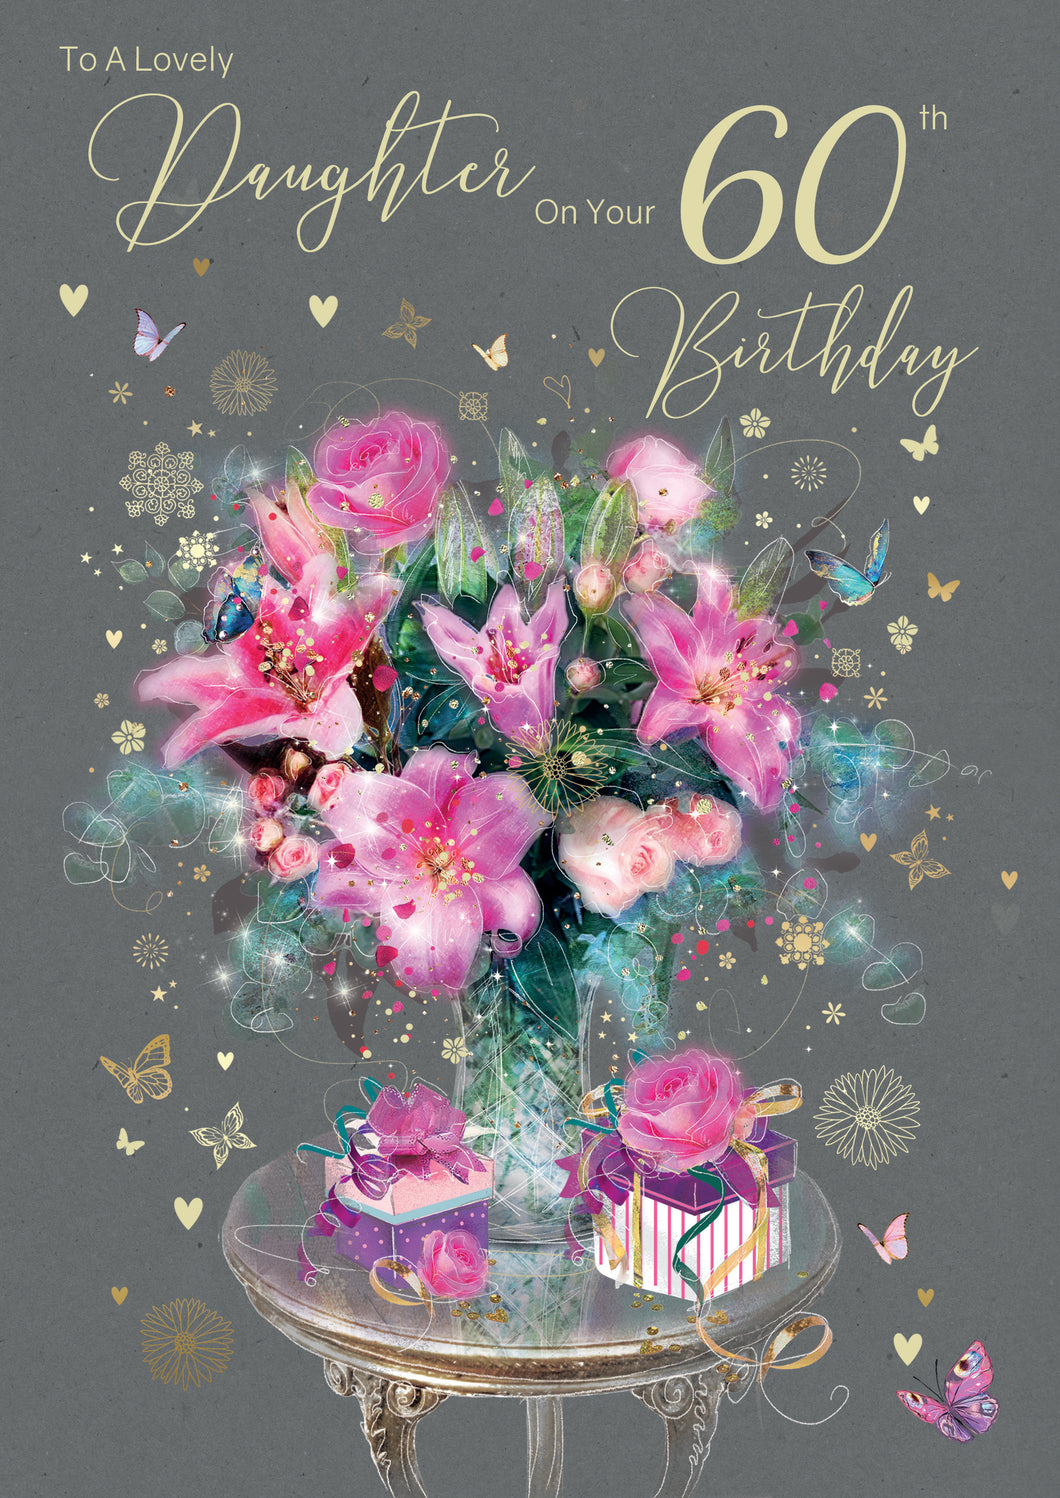 Daughter 60th Birthday Card - Daughter Birthday Cards Cherry Orchard Online